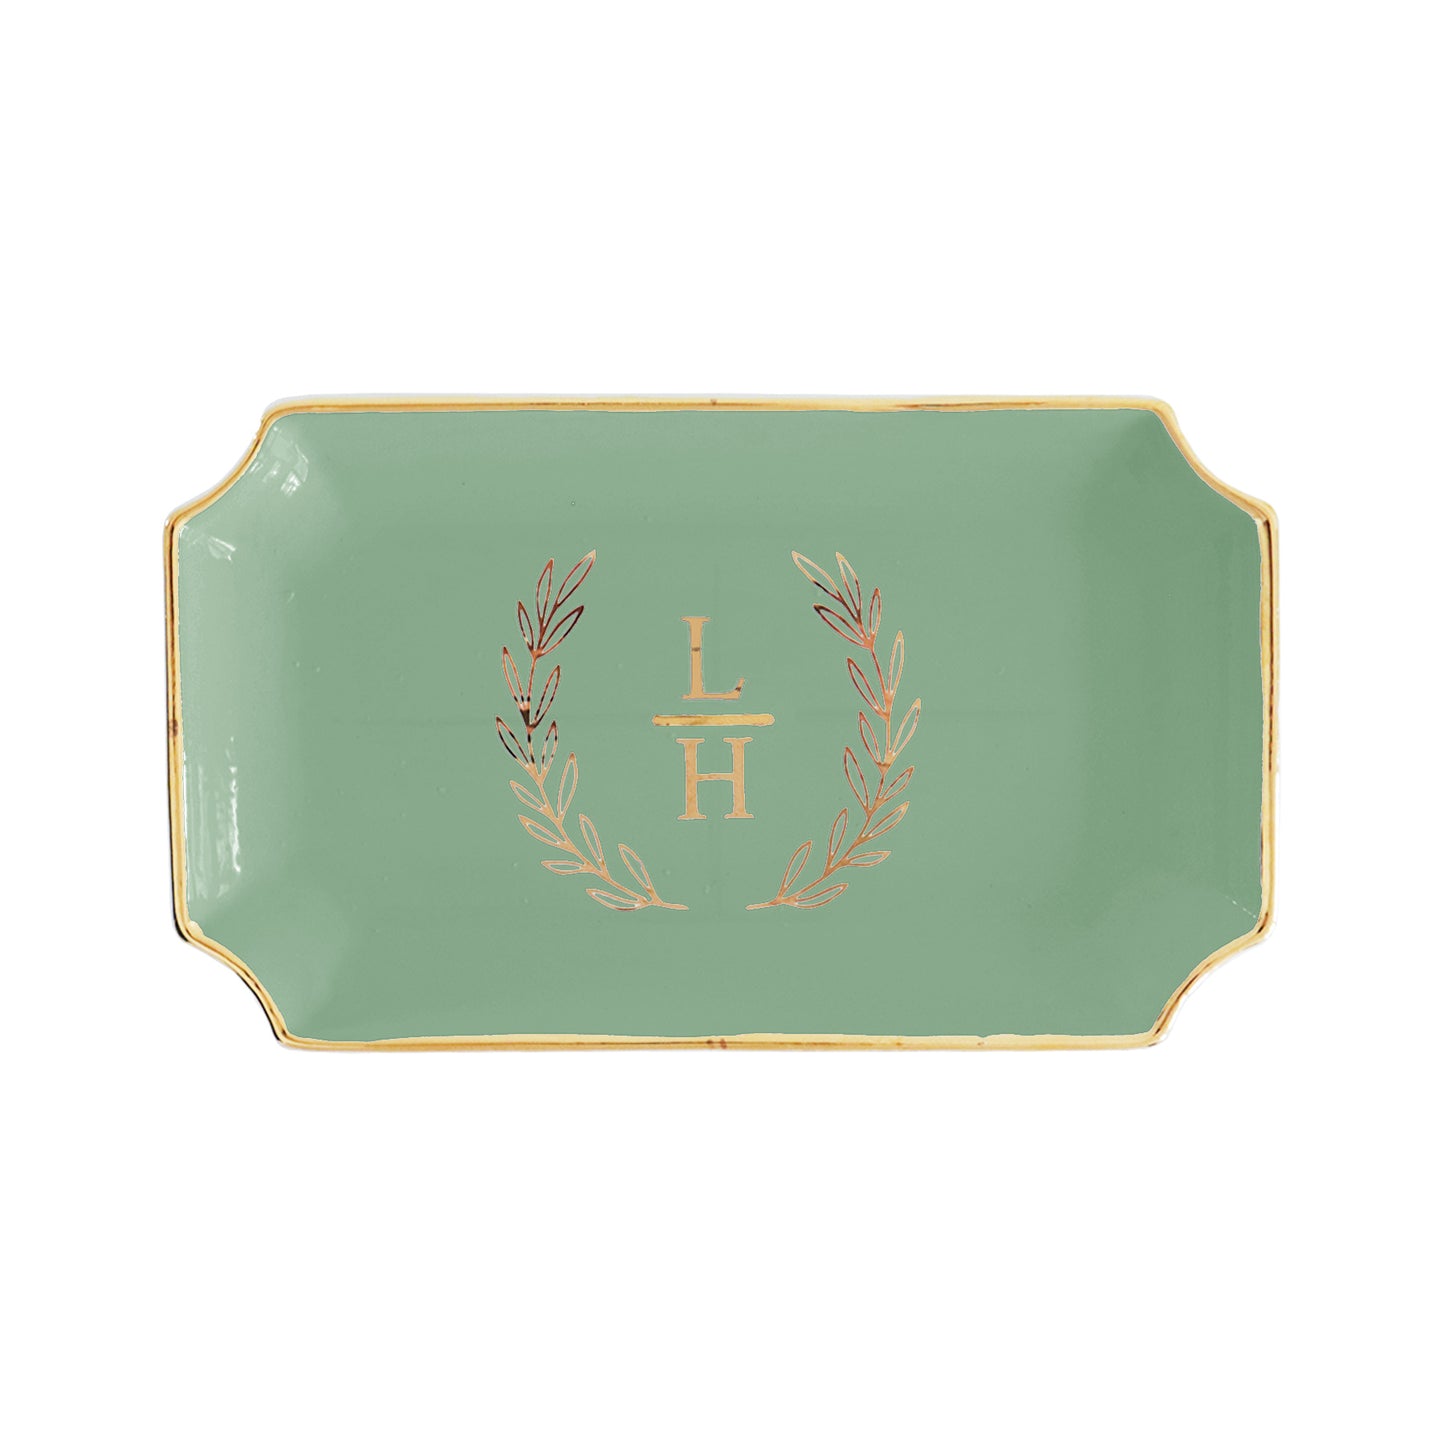 Laurel Wreath Monogram Trays with Gold Accent